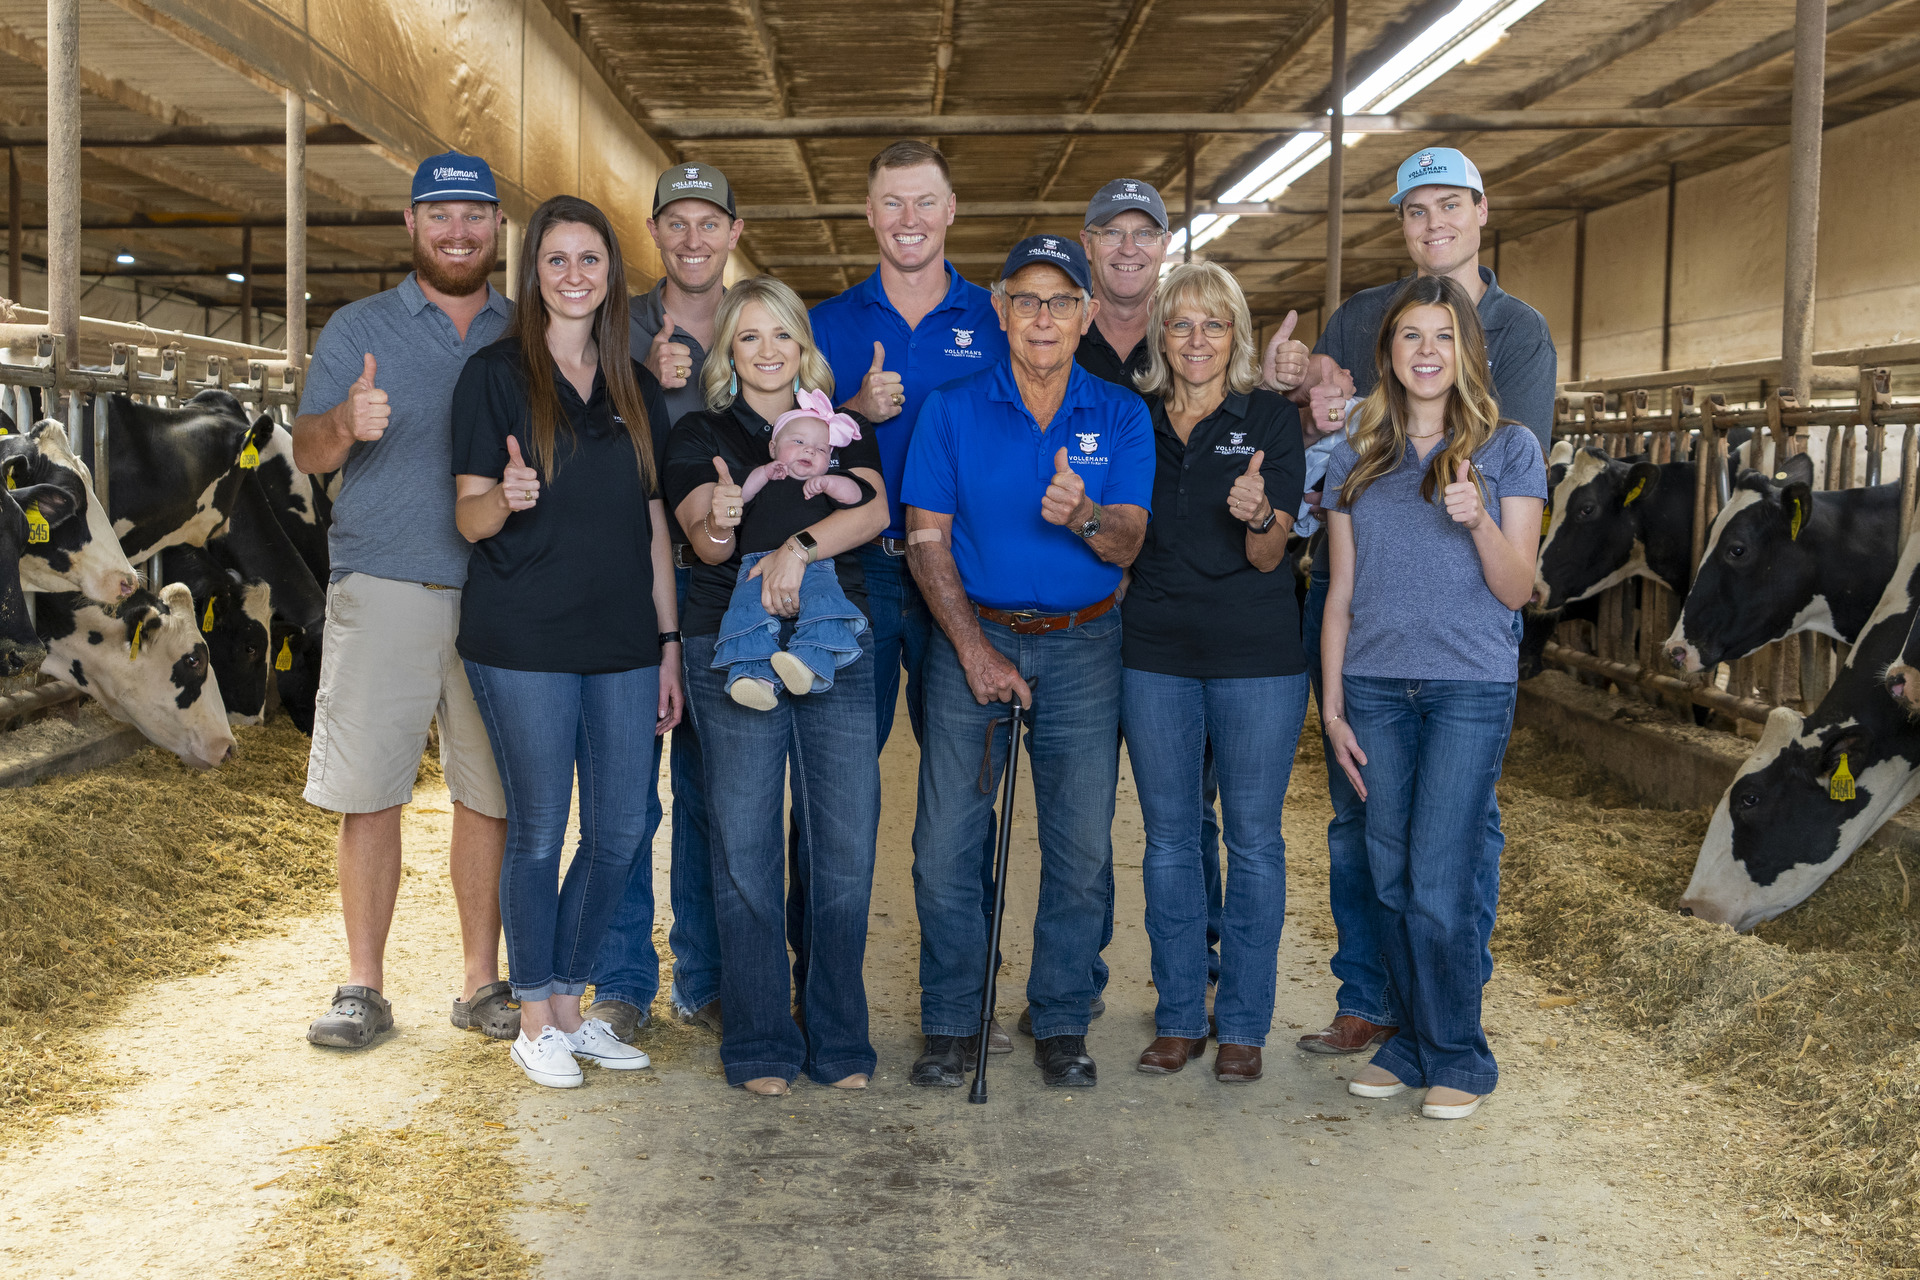 Members of the Volleman family, 6 men and 4 women, stand in the middle of the feed barn at the Volleman's Family Farm. They are all giving a thumbs up. 